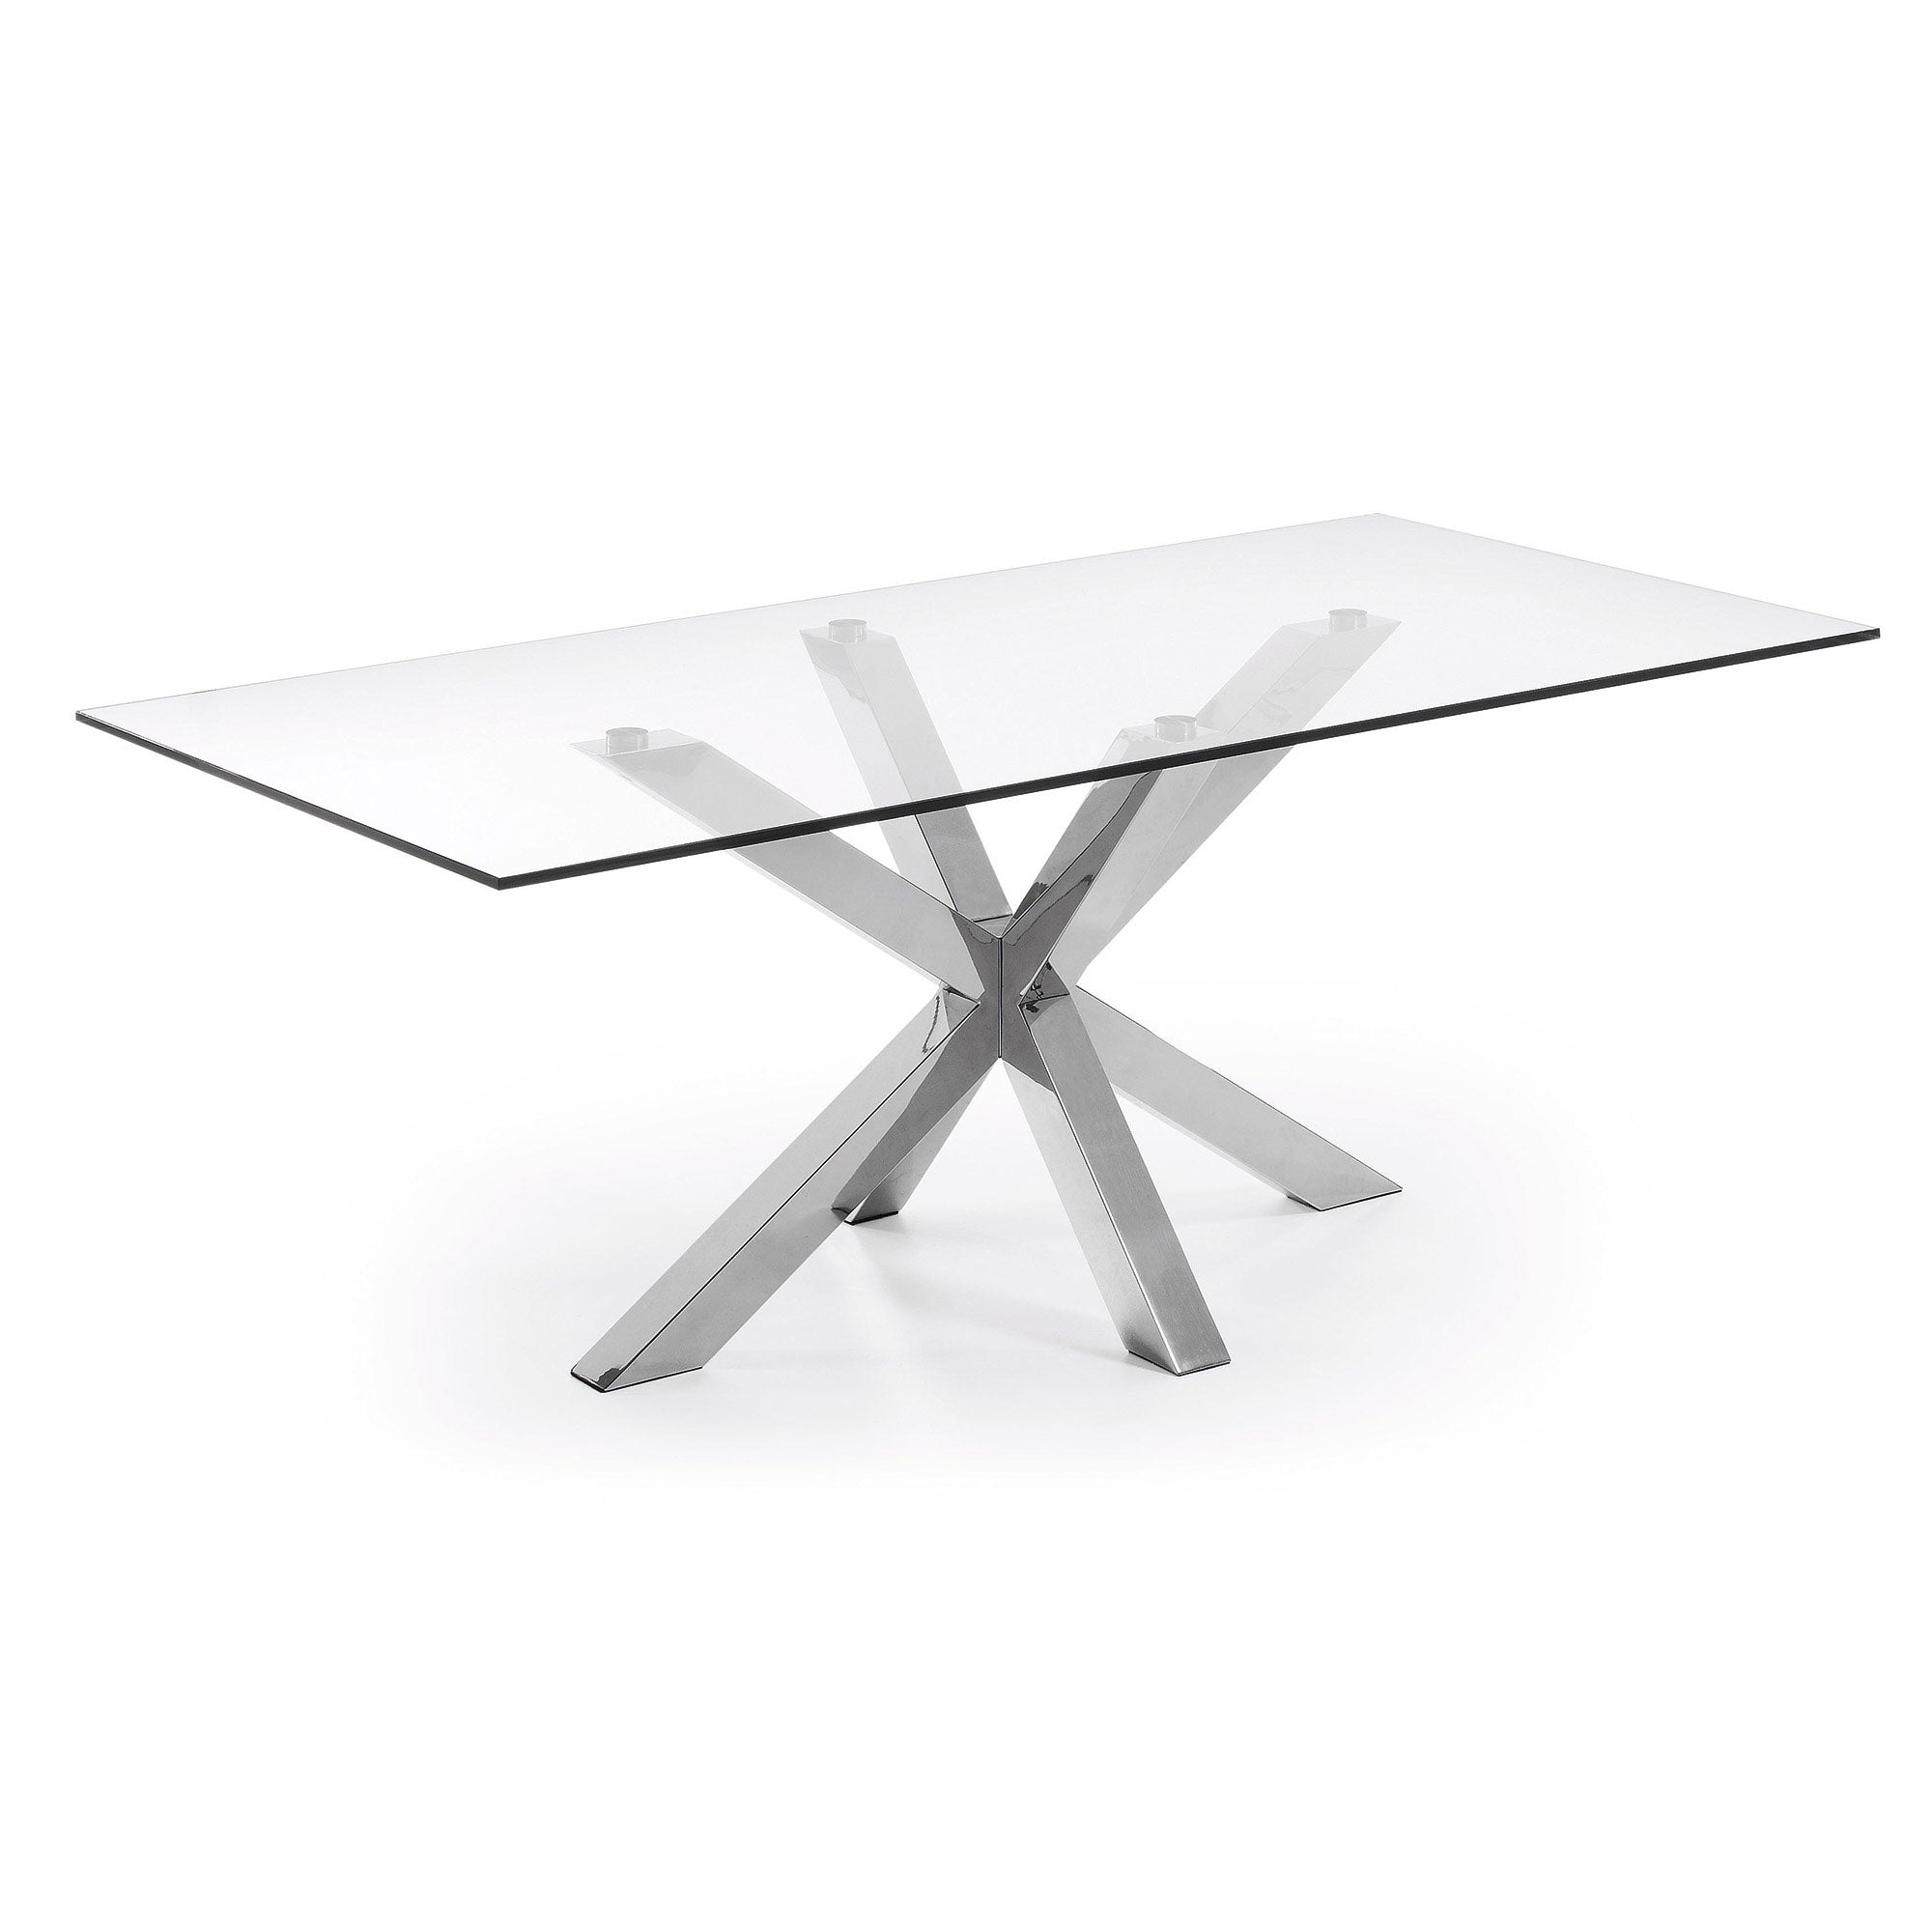 Argo glass table with stainless steel legs 200 x 100 cm